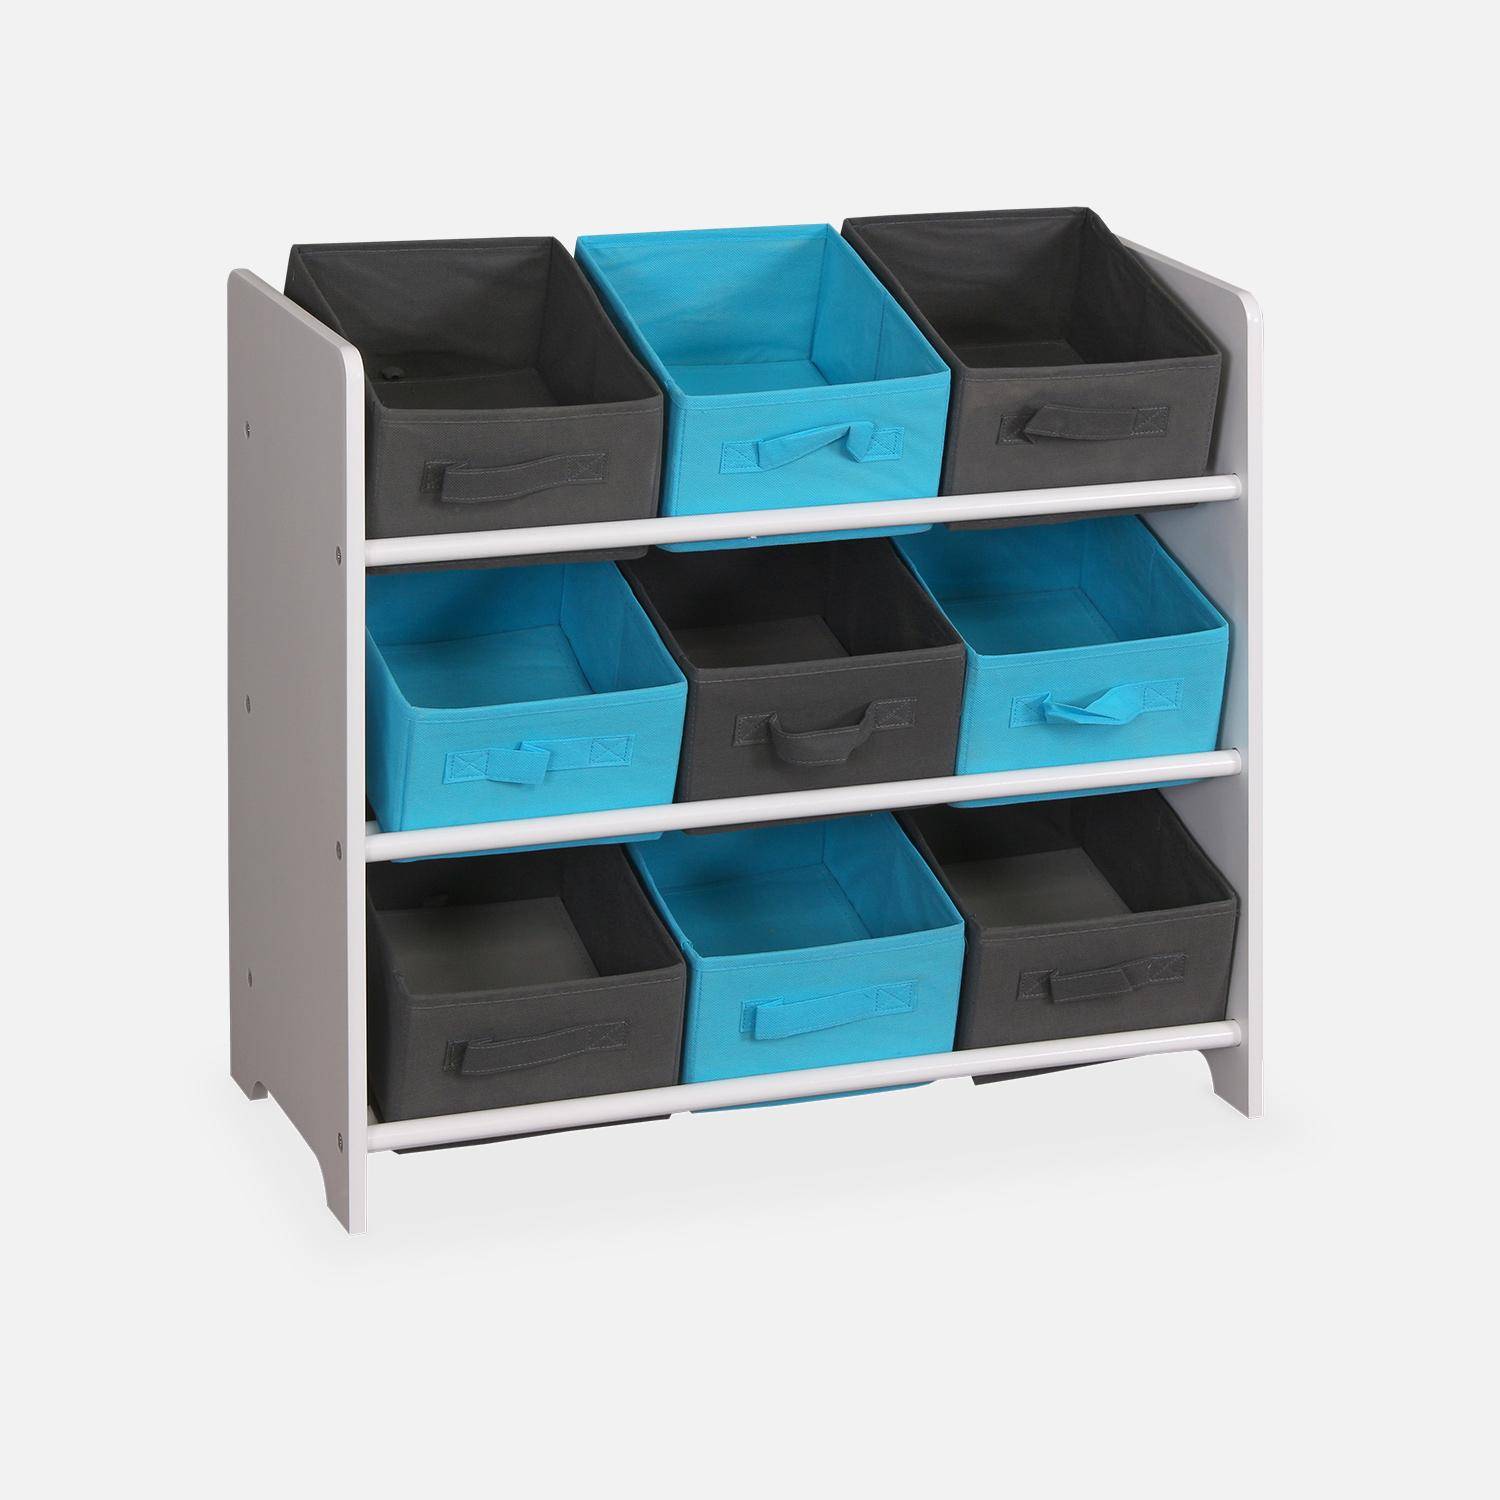 Storage combination with 9 boxes for kids toy, 65x30x59.5cm - Camille - Grey and Blue,sweeek,Photo3